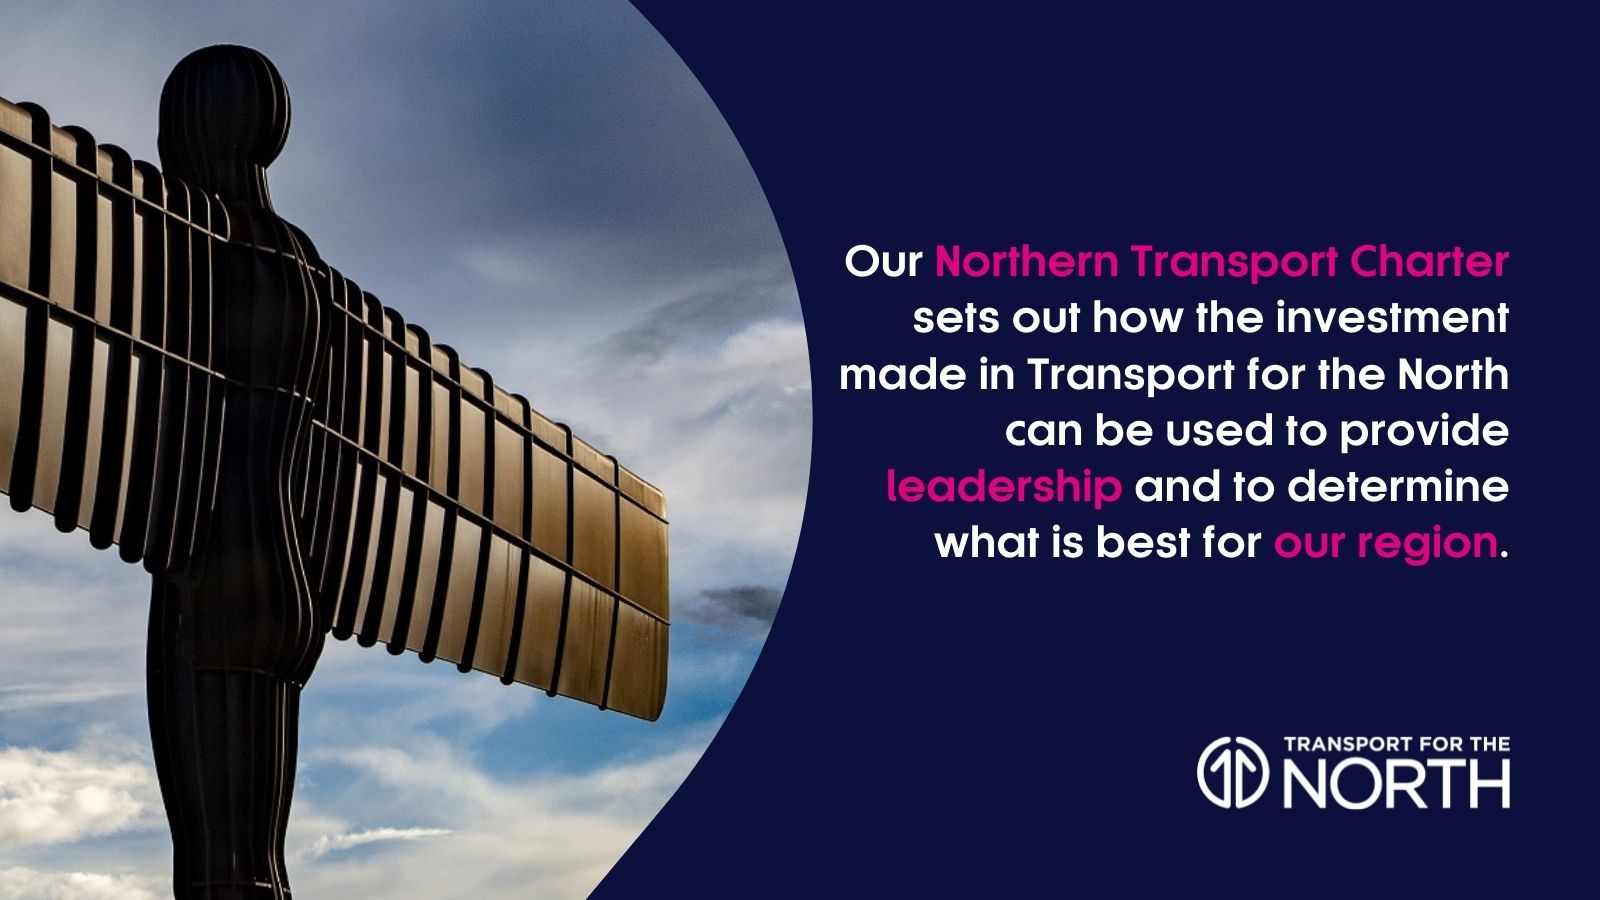 Angel of the North and a quote about the Northern Transport Charter